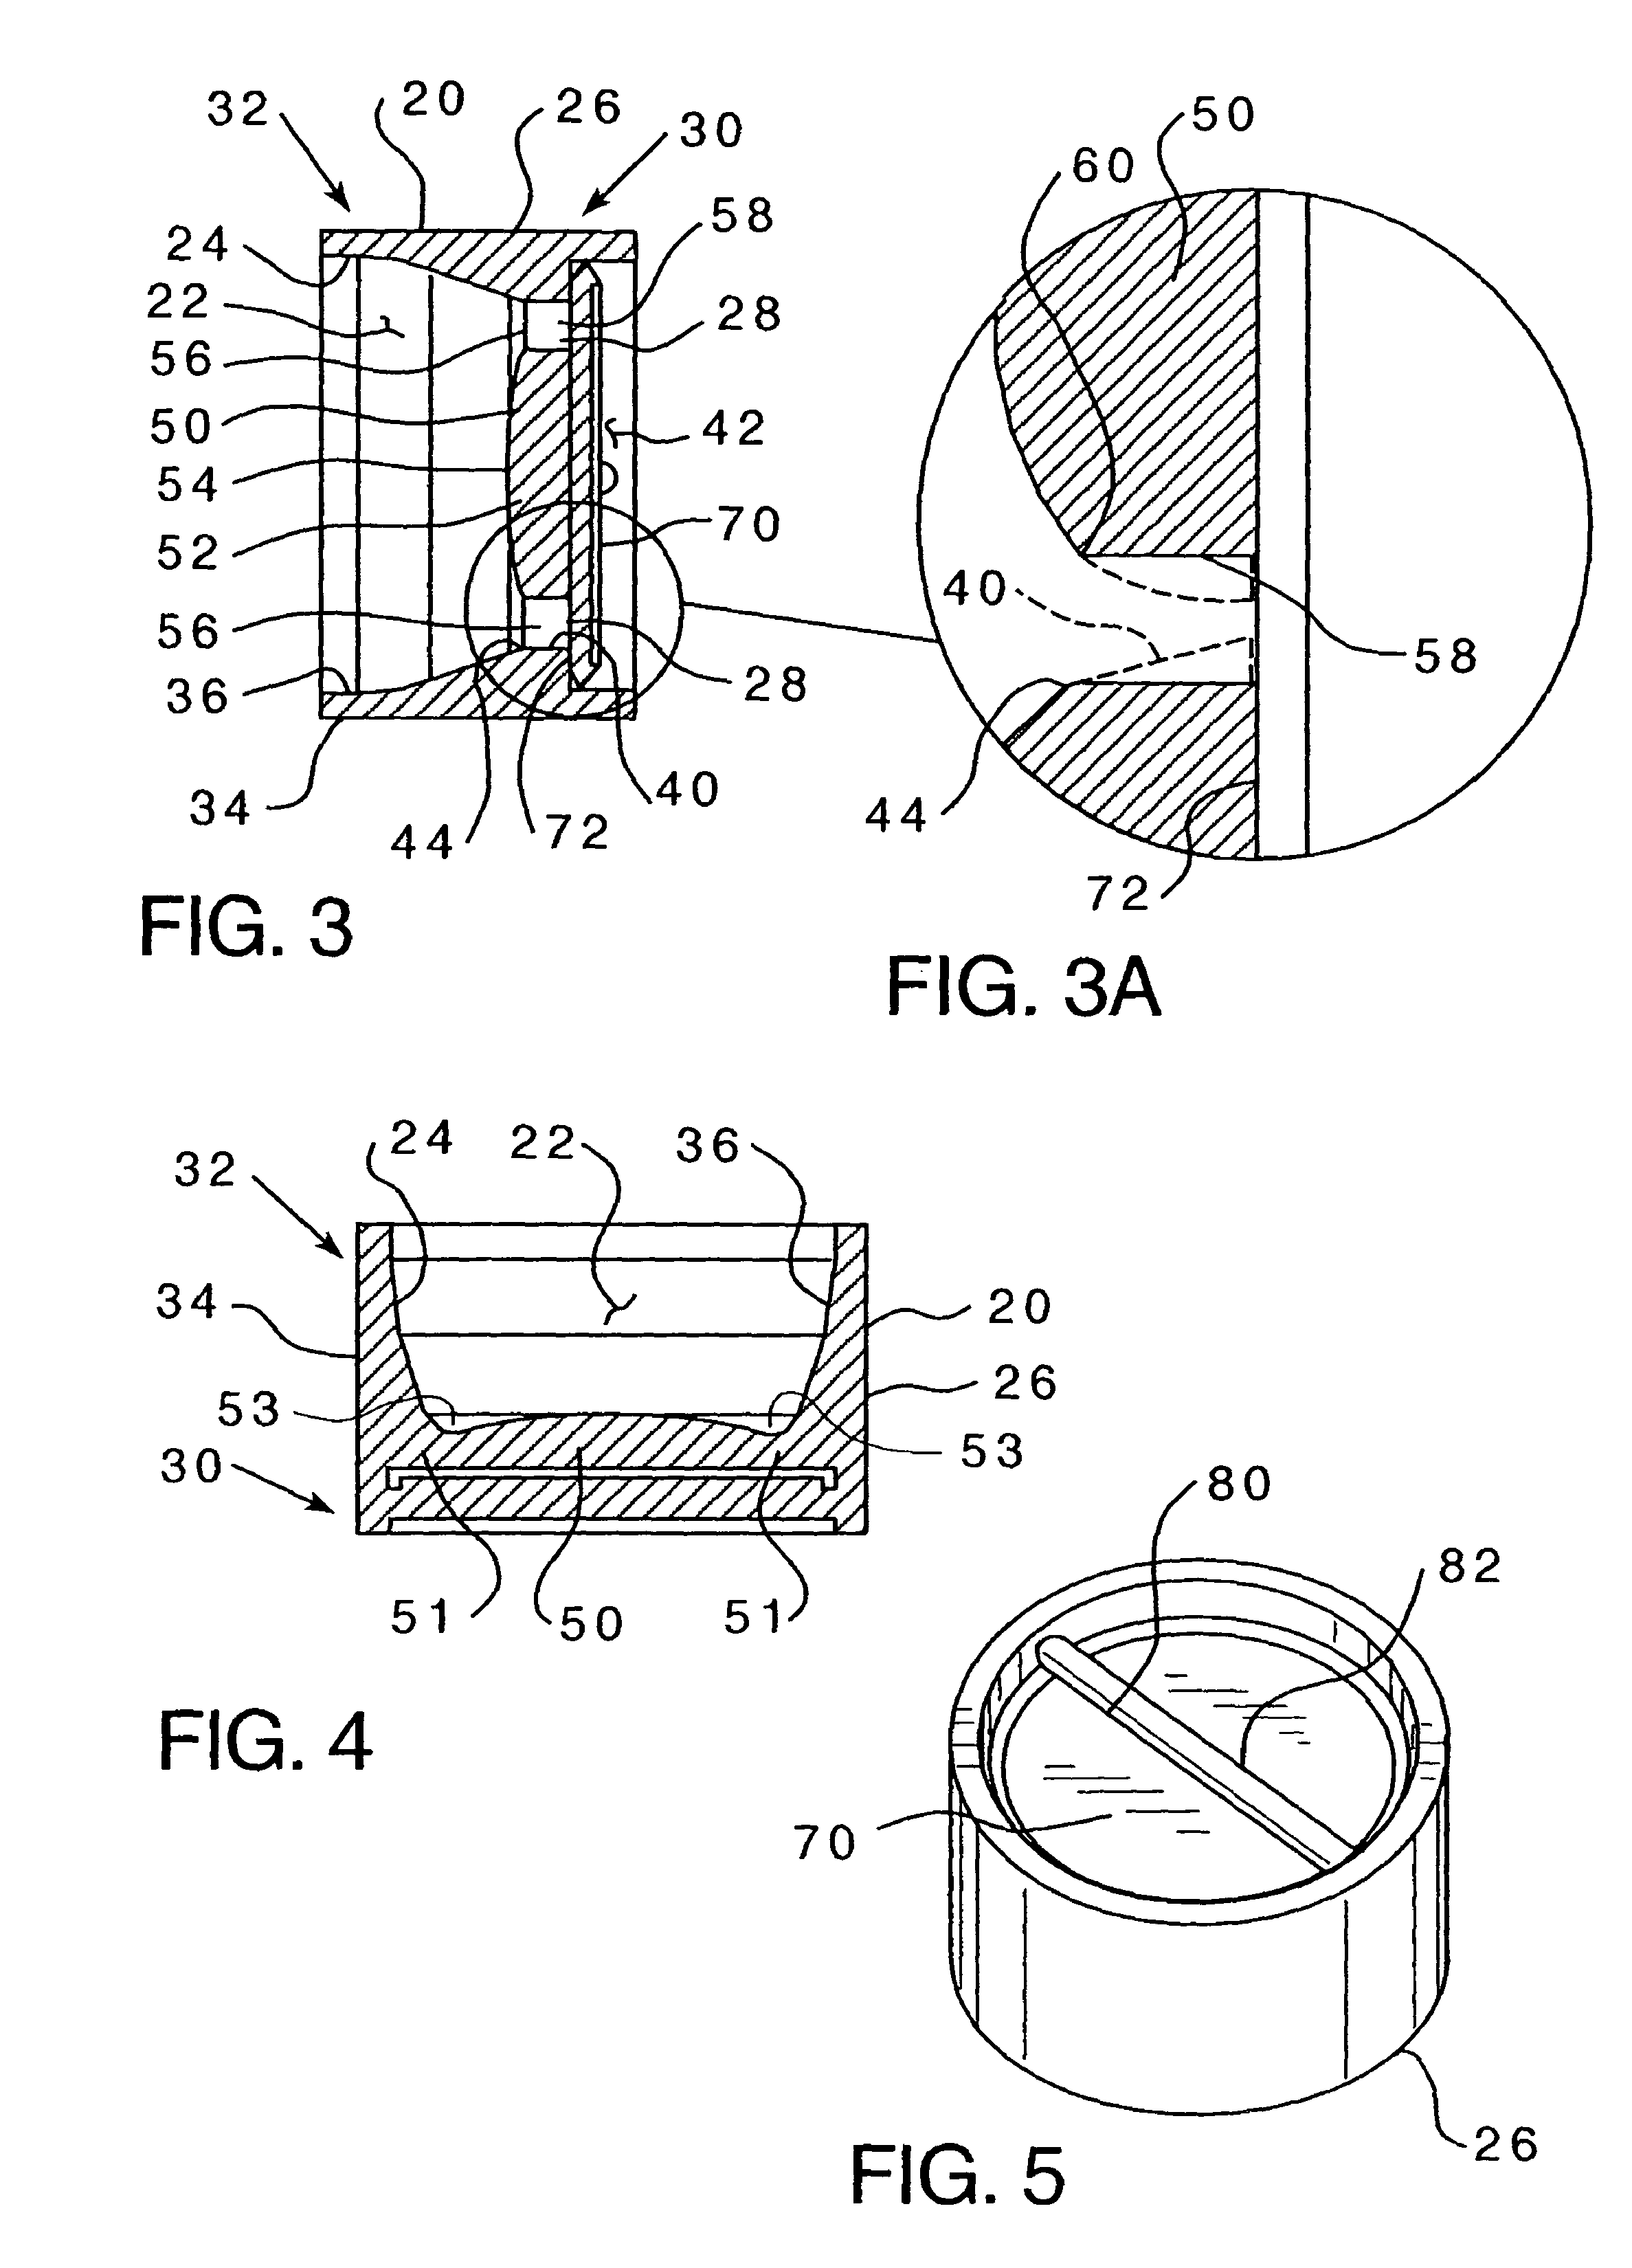 Portable urinal with a shaped inlet and a membrane valve